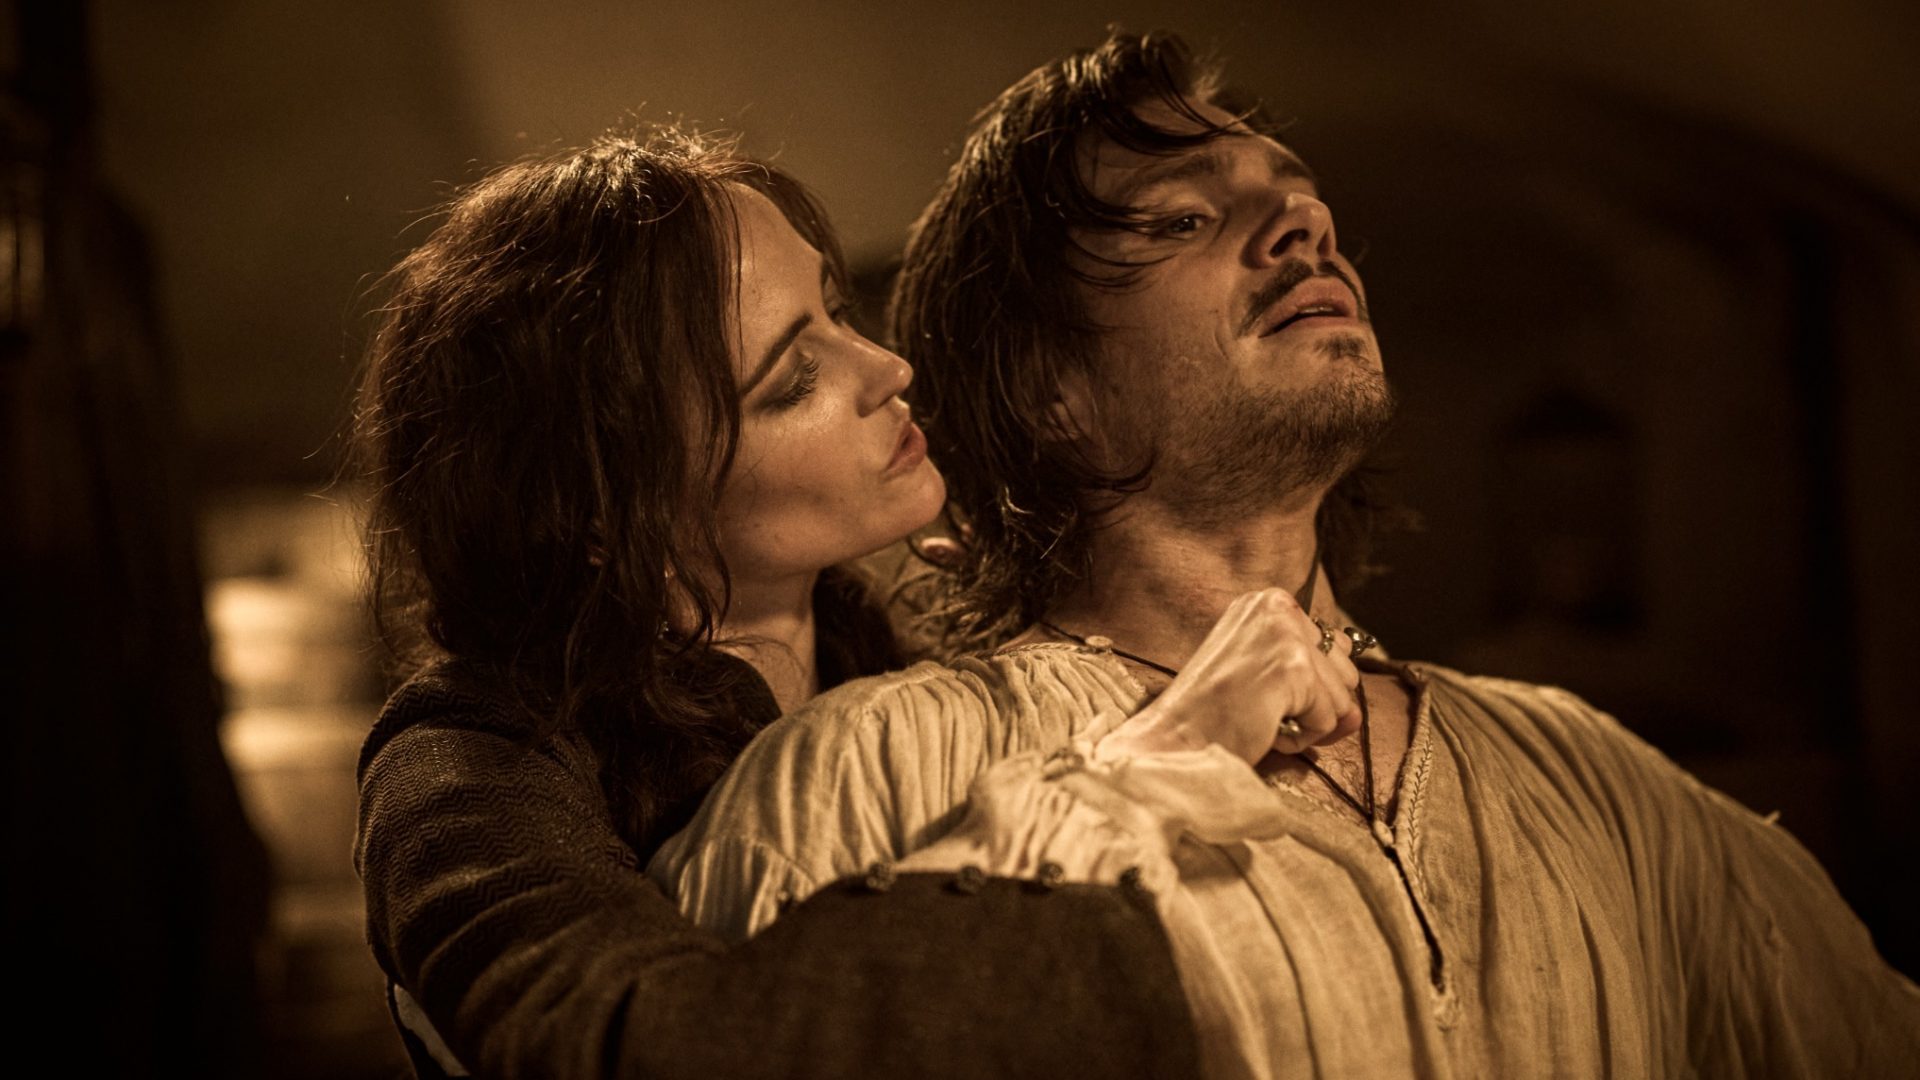 Eva Green and François Civil in The Three Musketeers: Milady, the second instalment in Martin Bourboulon’s two-part adaptation of Alexandre Dumas’s swashbuckler. Photo: Ben King